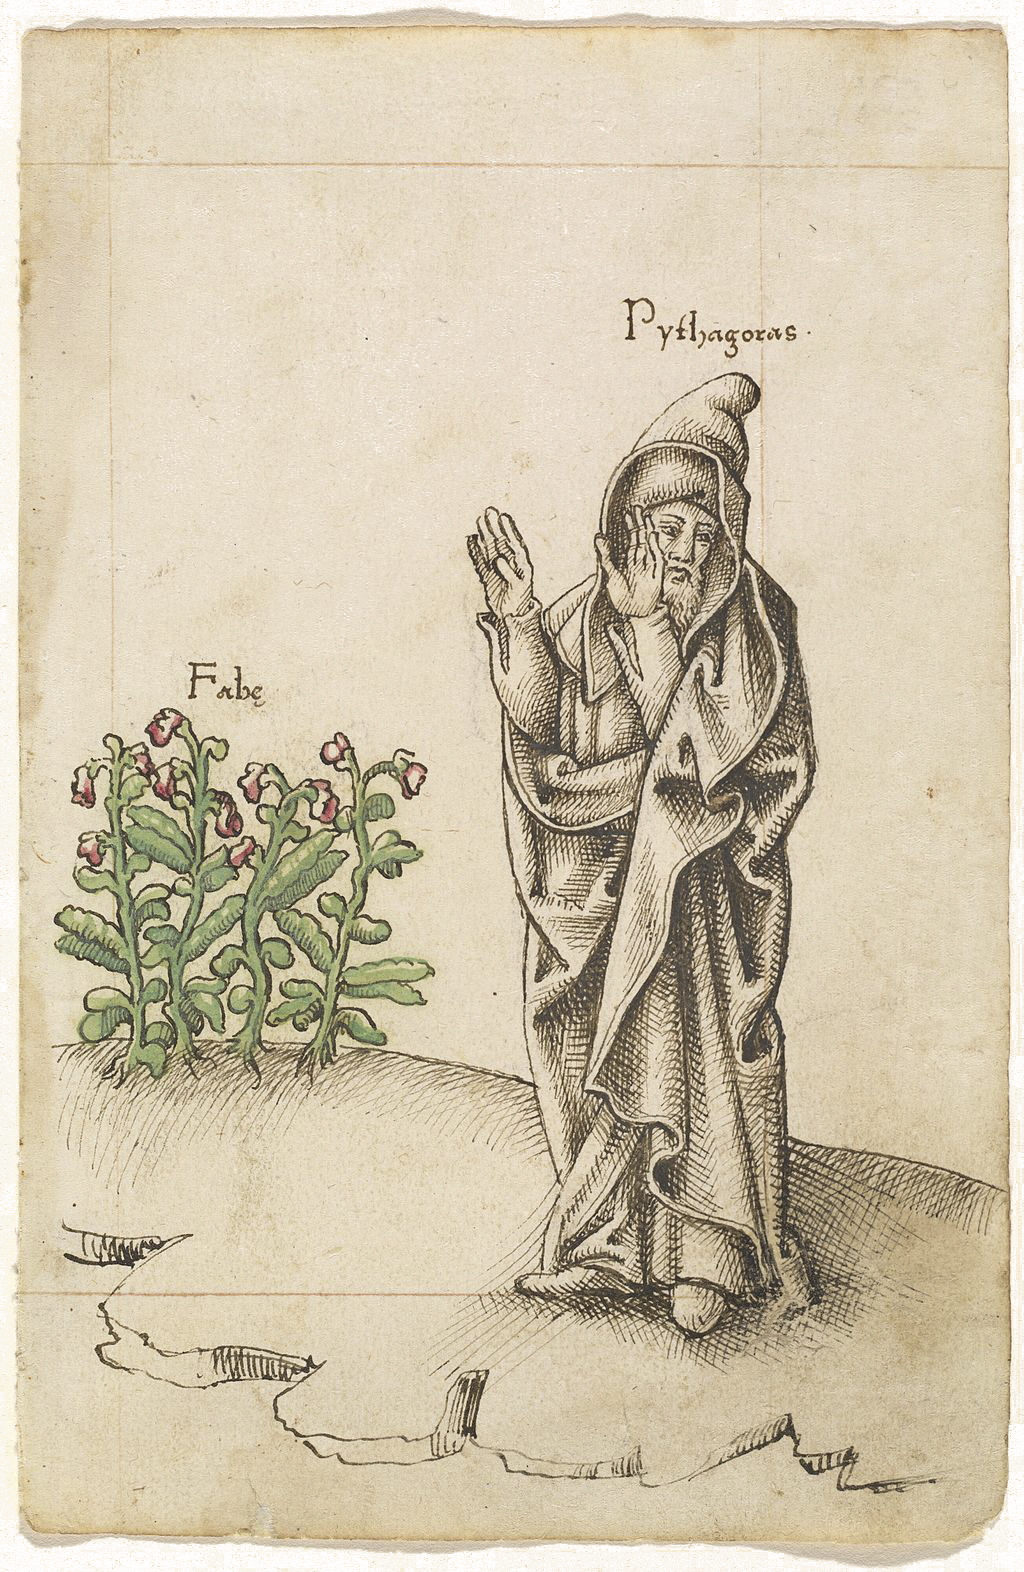 pythagoras turning down some beans